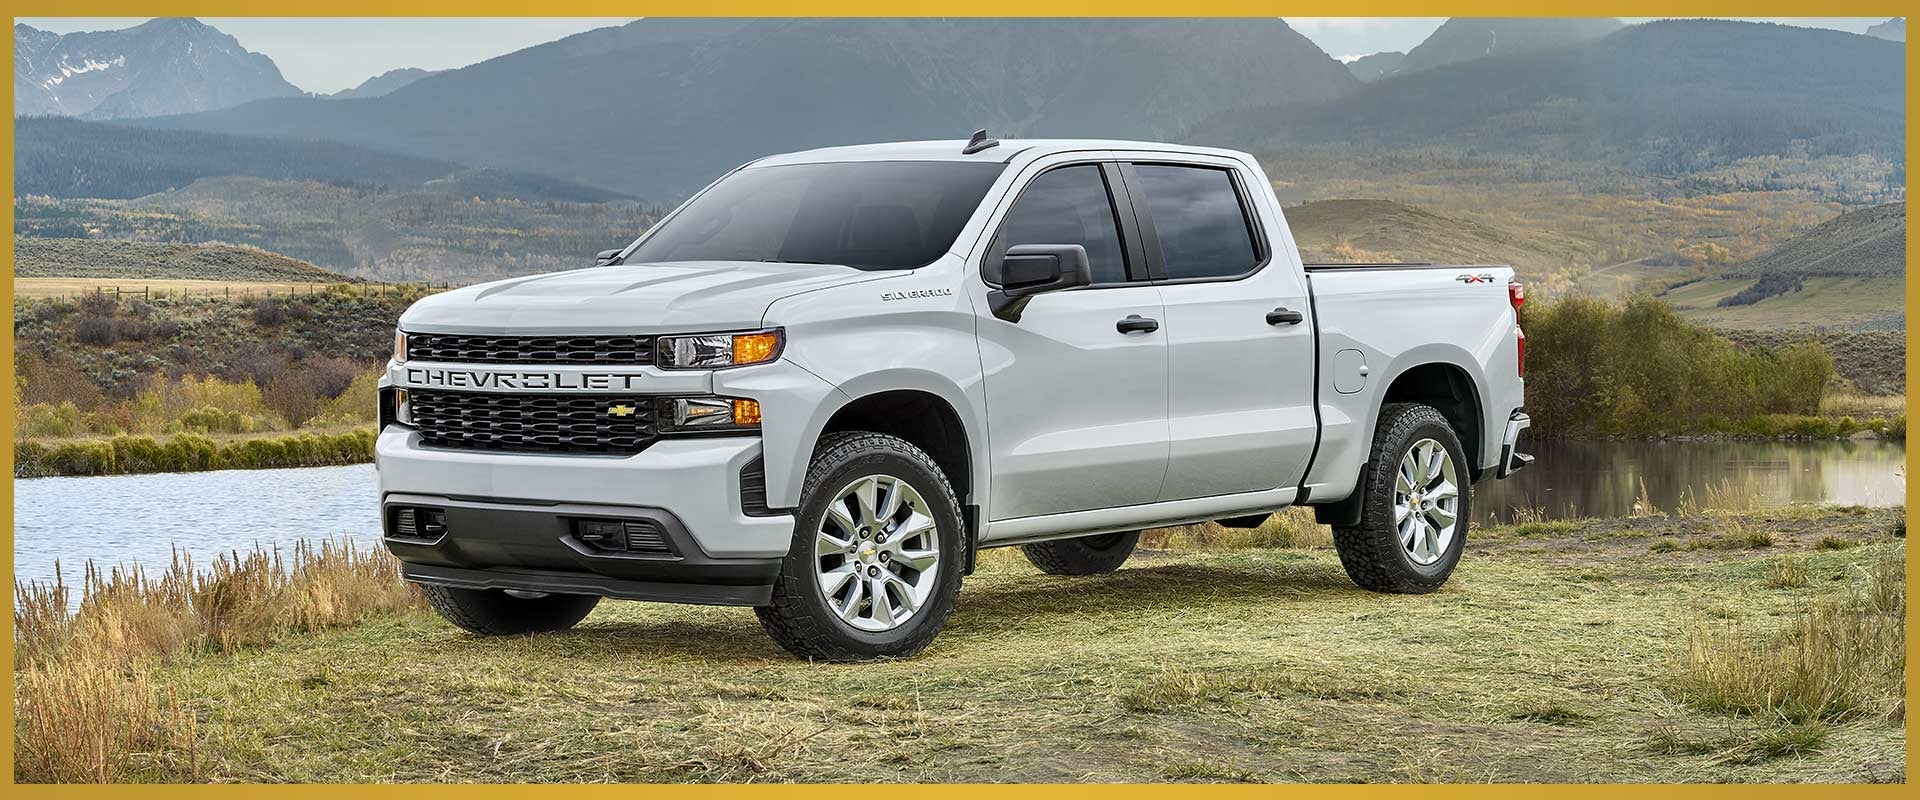 2021 Chevy Silverado 1500 Aberdeen Md View Specs And Technology